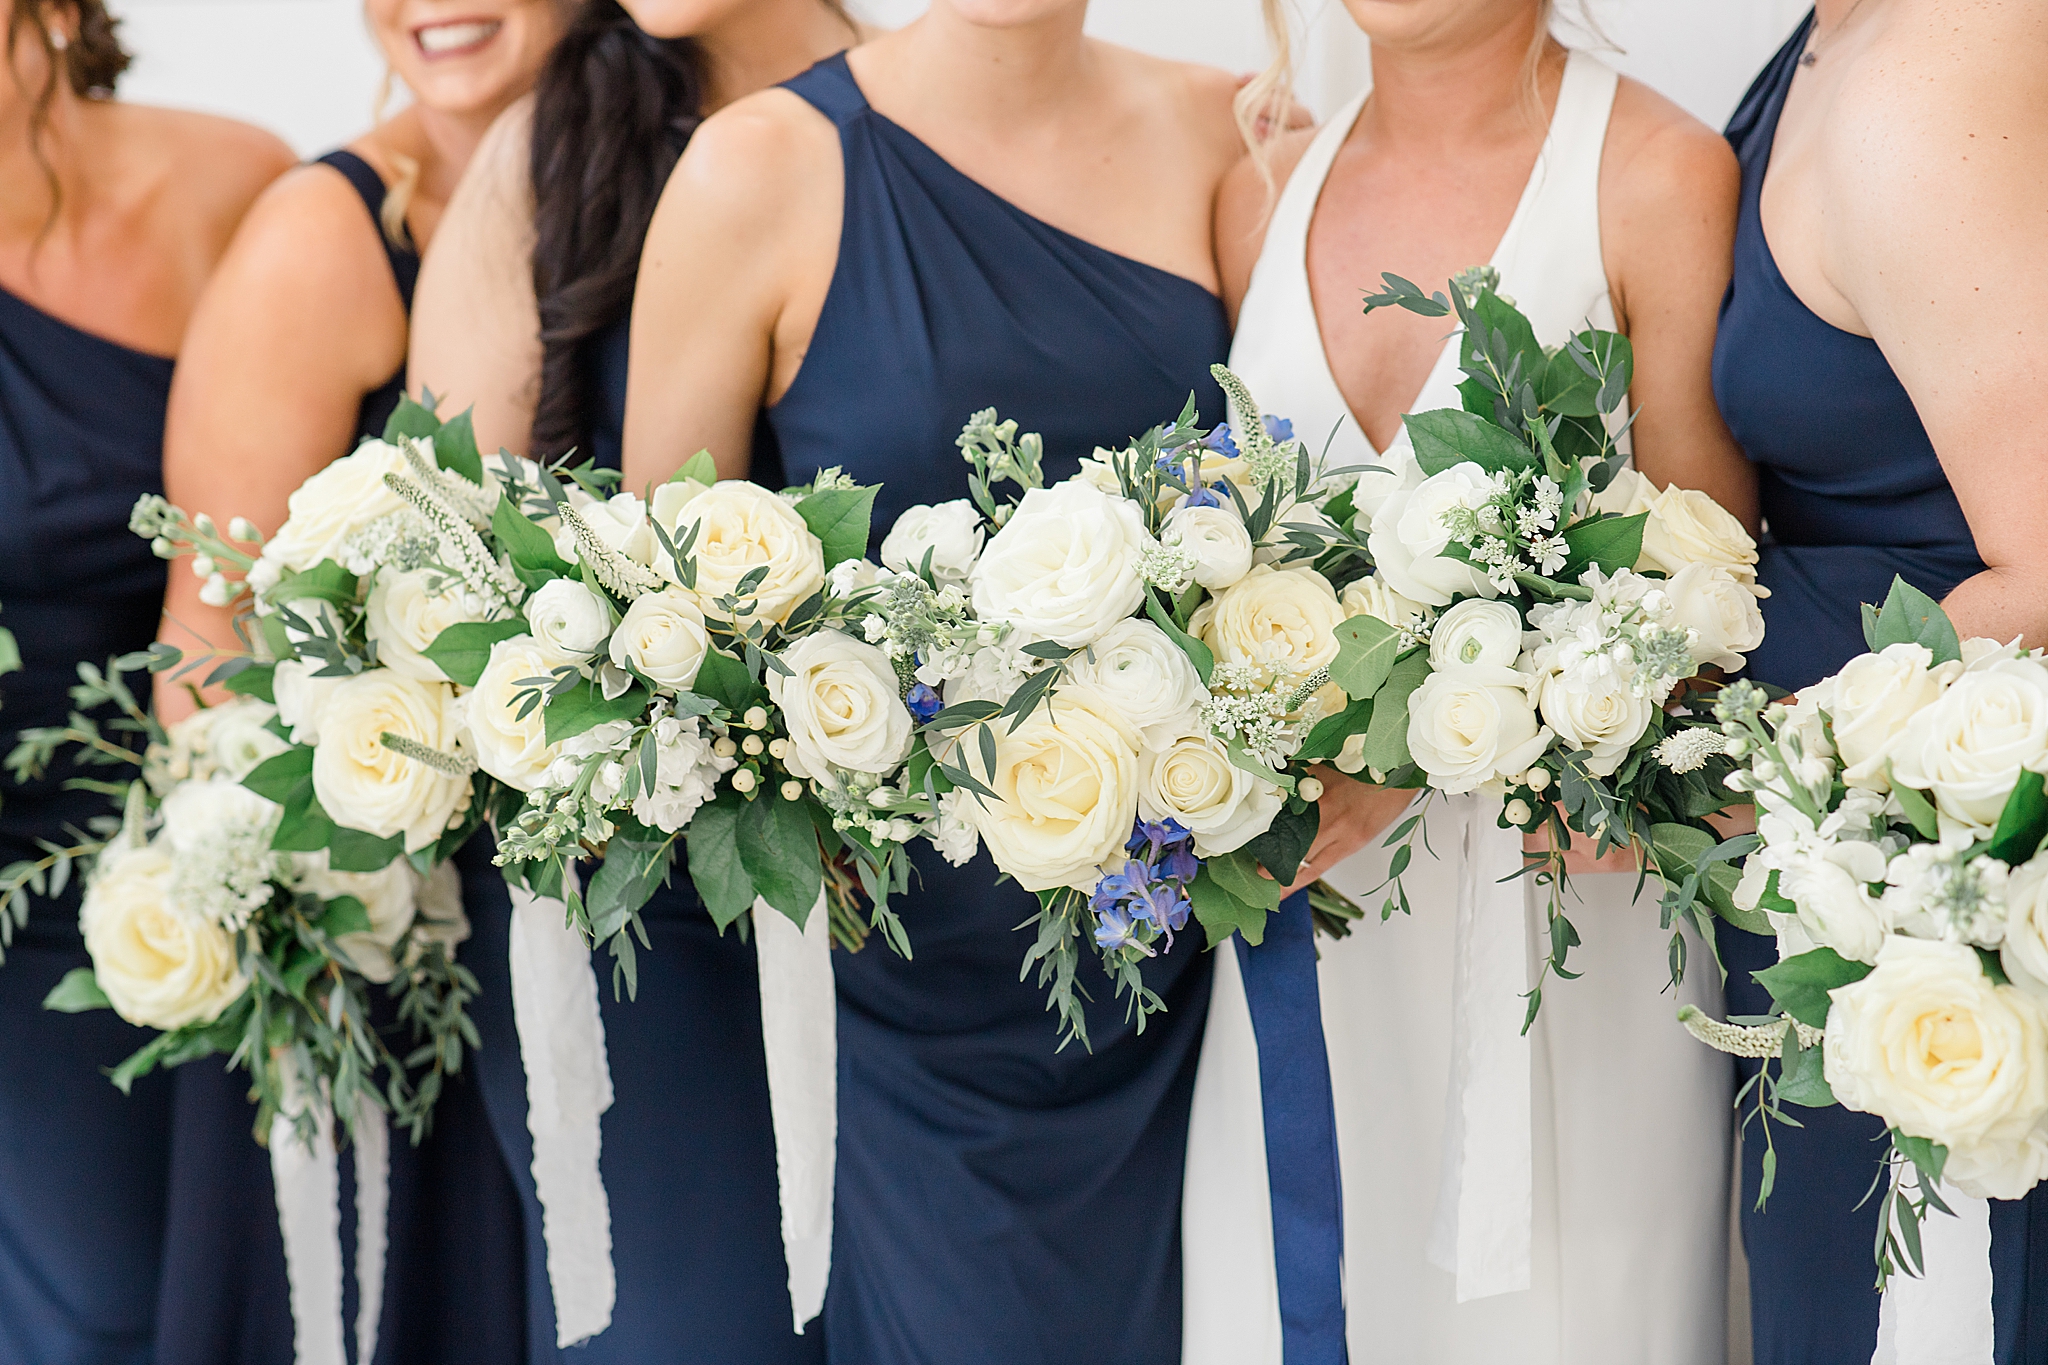 Dallas TX wedding flowers with navy blue ribbons